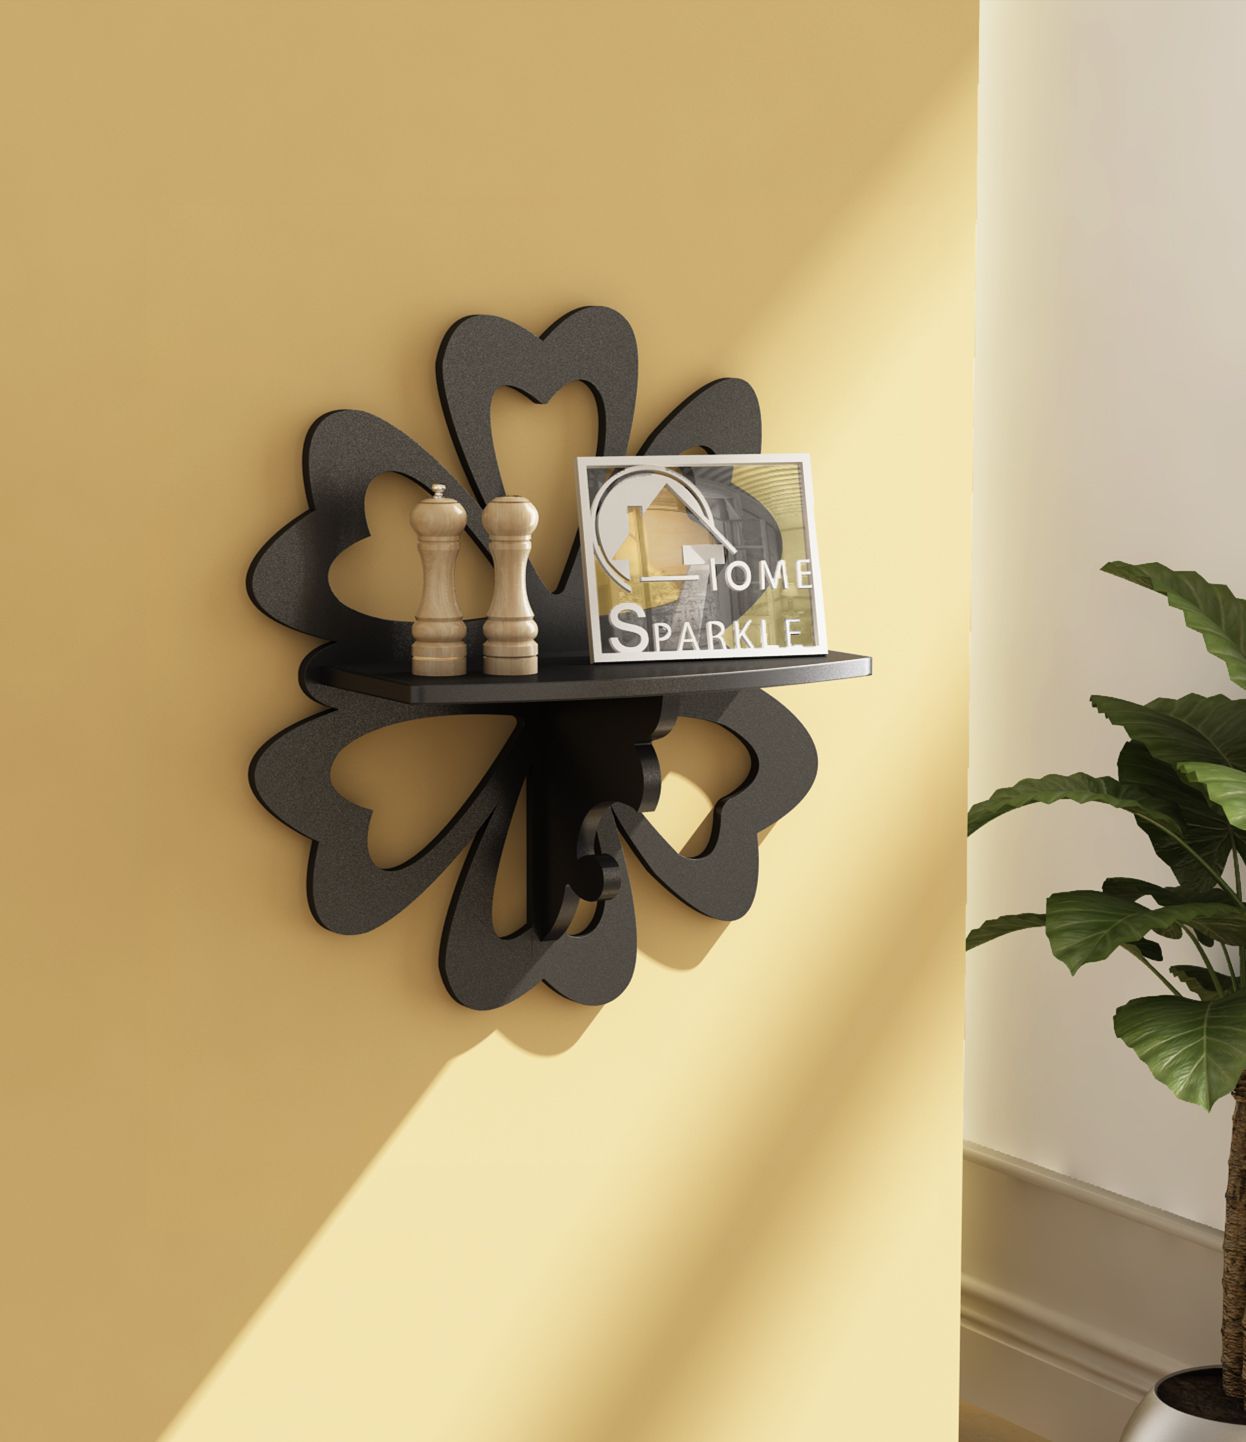 Home Sparkle MDF Carved Shelf For Wall Décor -Suitable For Living Room/Bed Room (Designed By Craftsman)